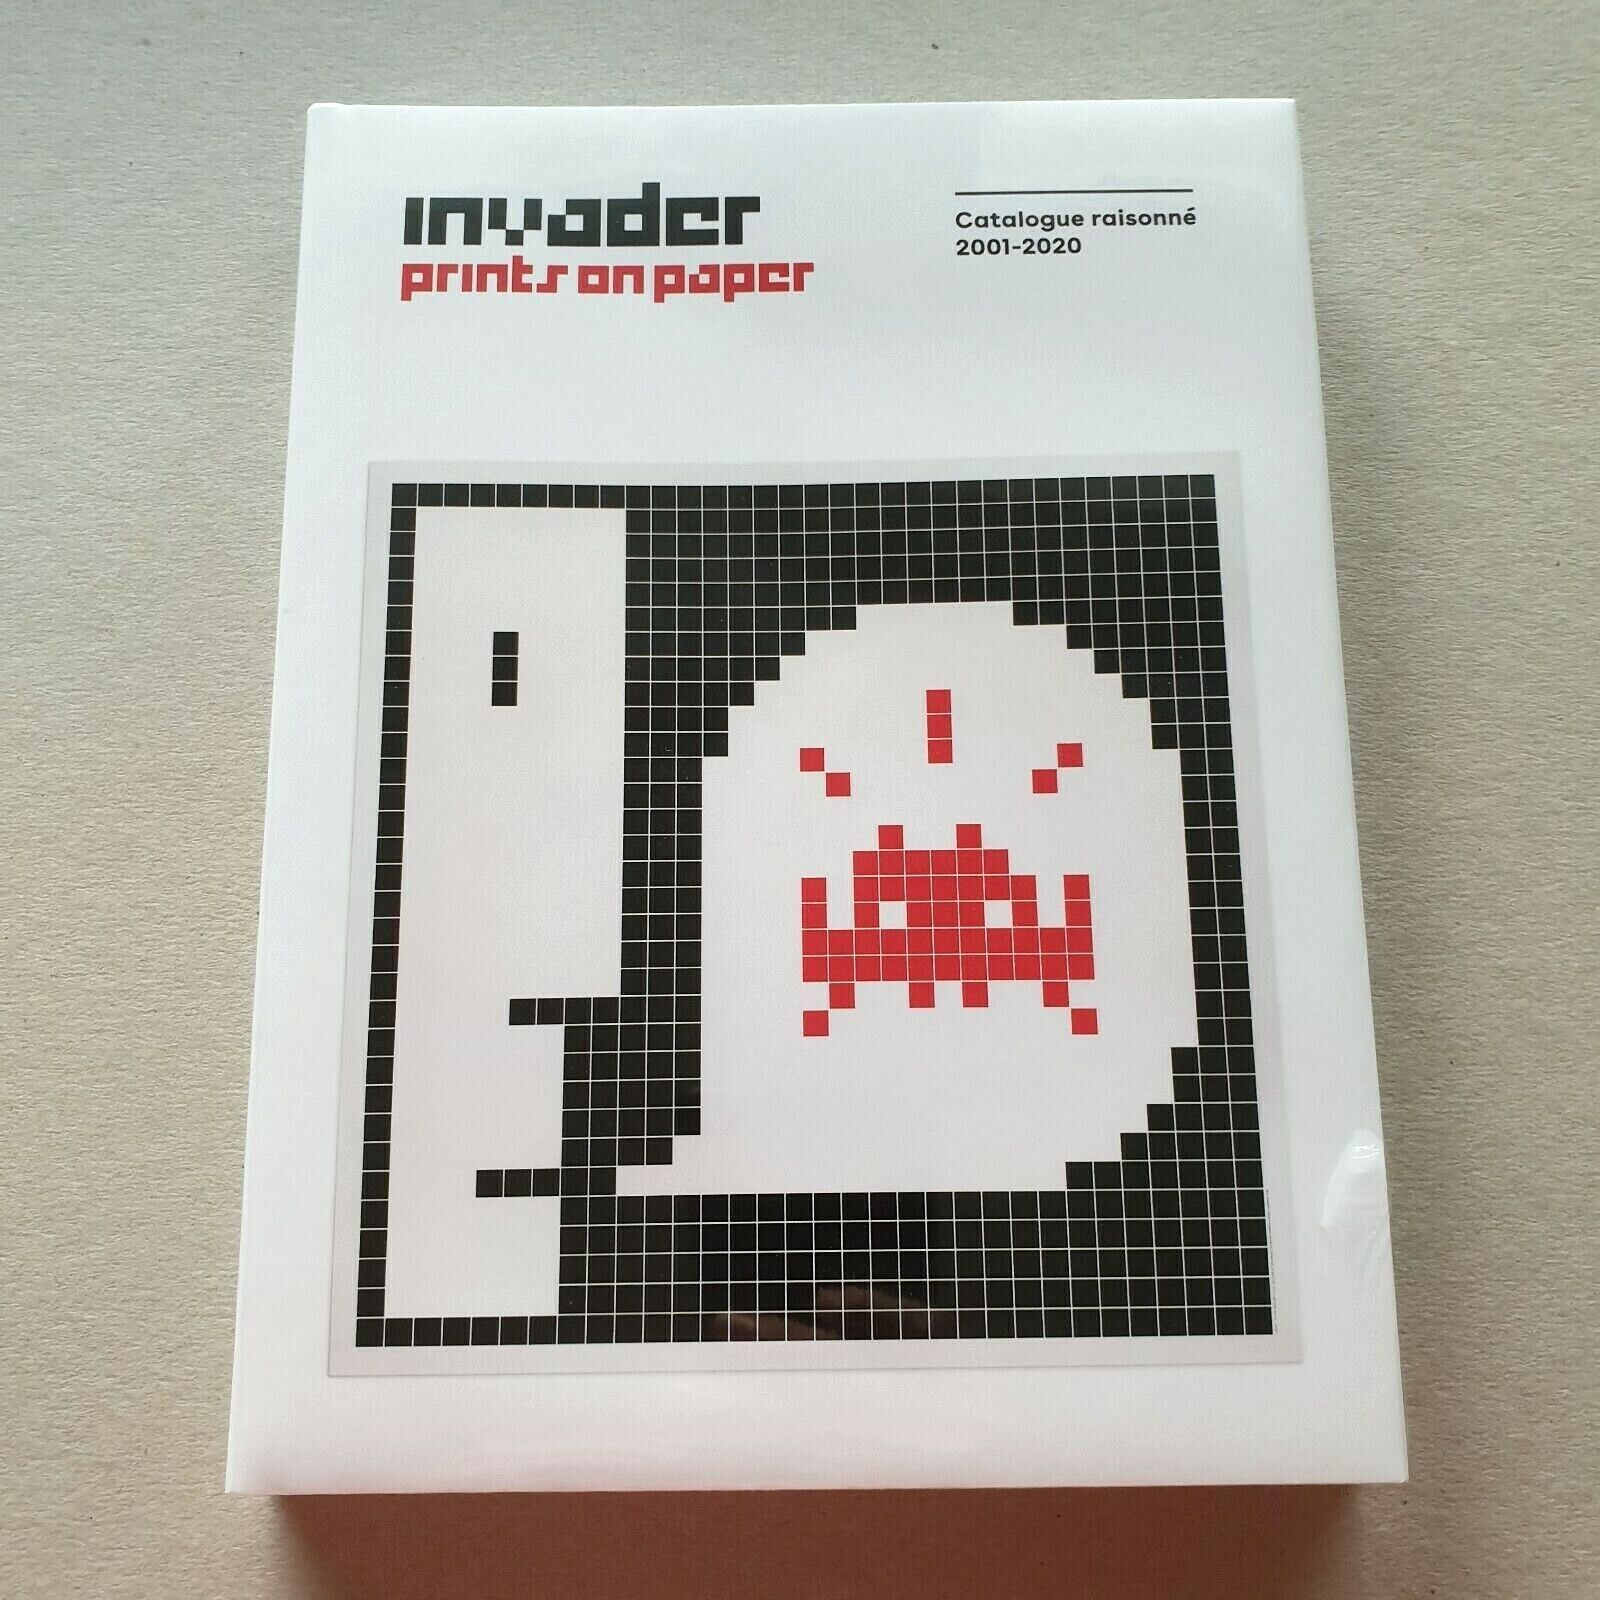 INVADER - PRINTS ON PAPER Book Sealed /4000 Limited 1st Edition 1st Printing